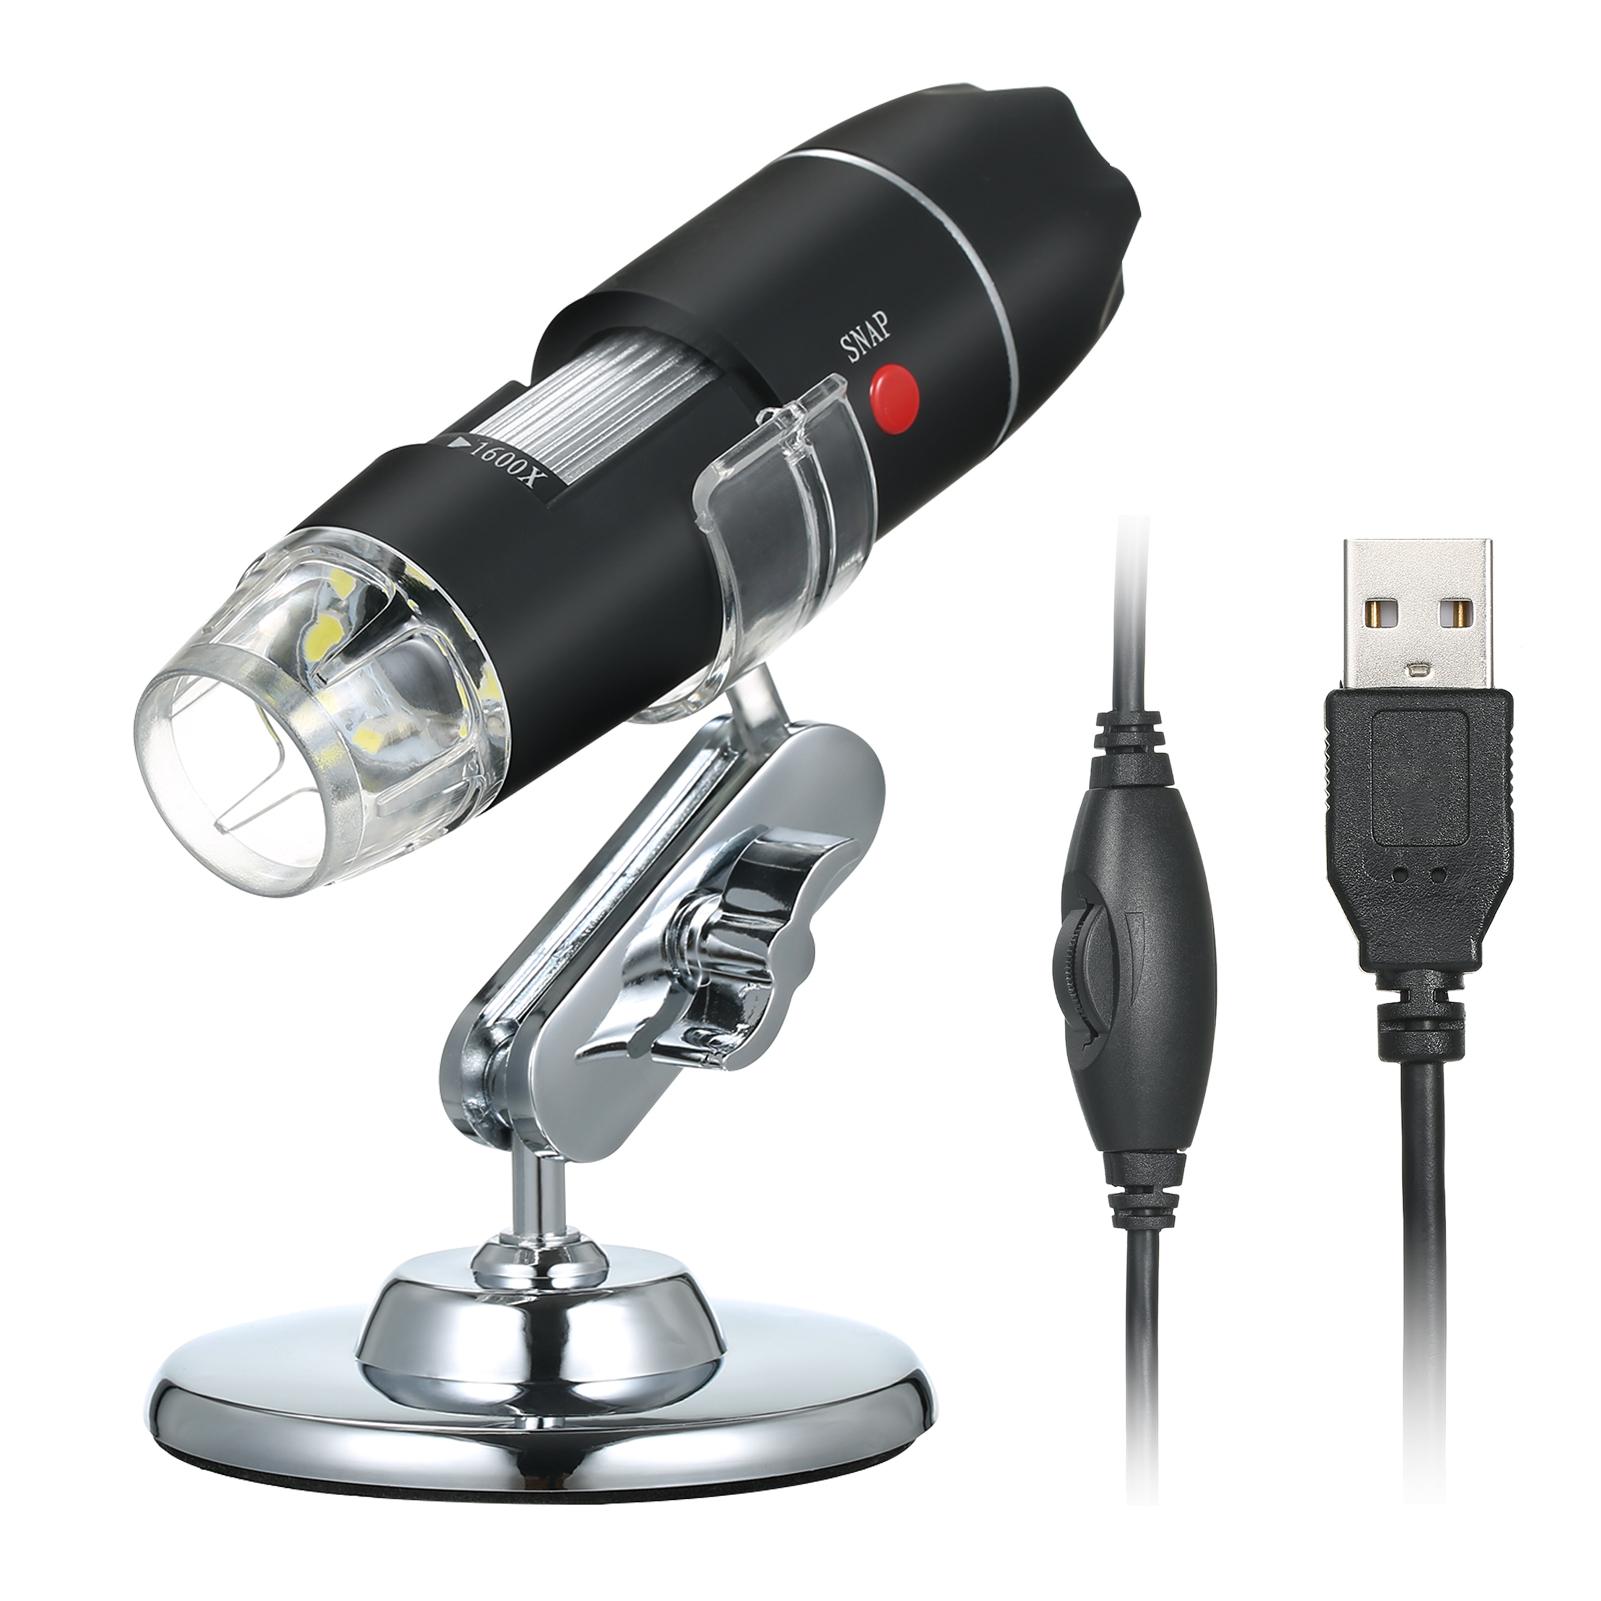 TOMTOP JMS USB Digital Microscope 1600X Magnification Camera 8 LEDs with Stand Portable Handheld Inspection